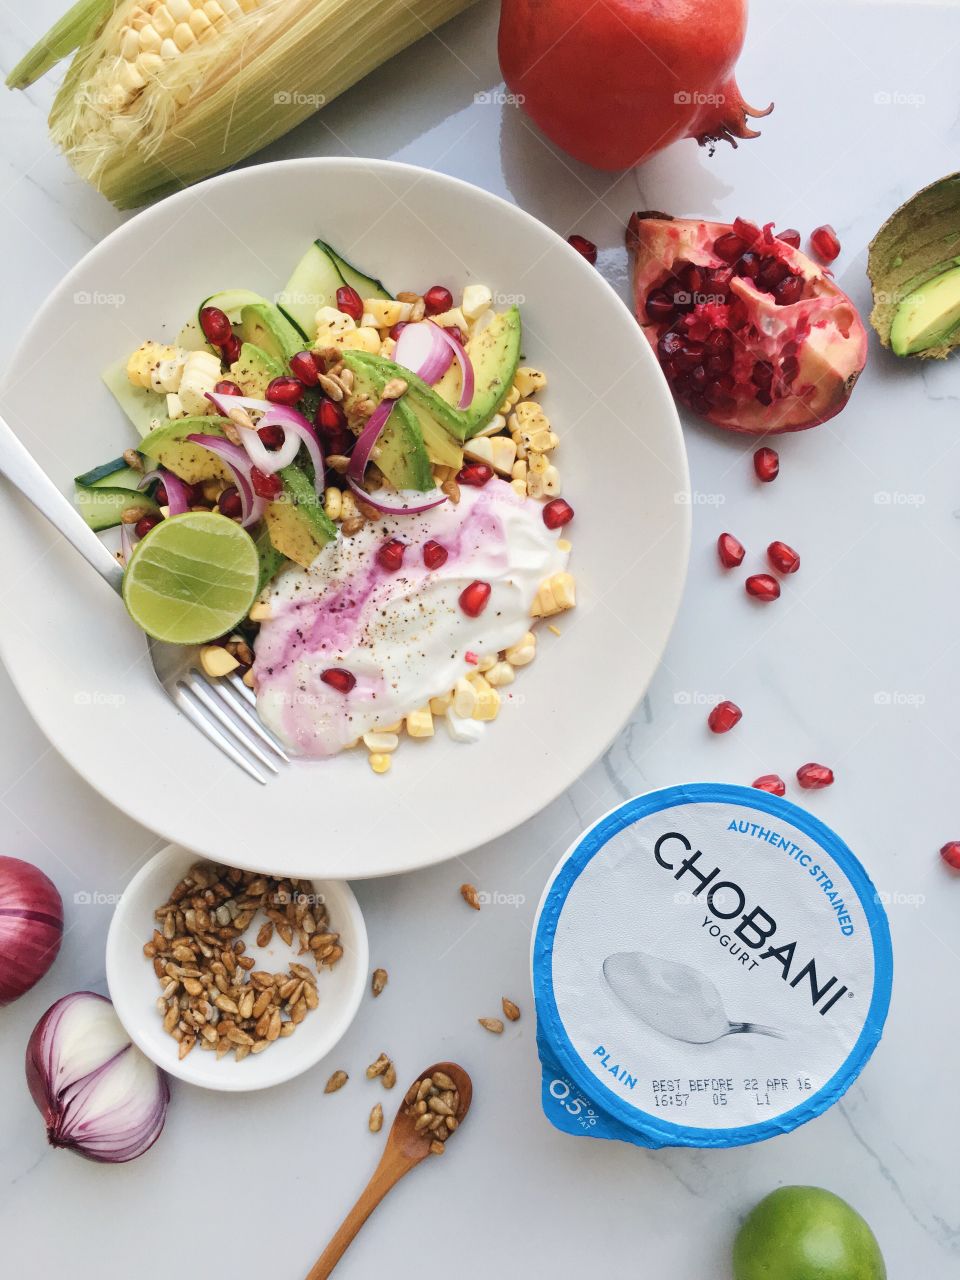 Made with Chobani : Healthy avocado and corn salad with CHOBANI Plain yogurt.
(CHOBANI Plain, sweet corn, avocado, Japanese cucumber, pomegranate, red onion, lime, sunflower seed, and pepper)